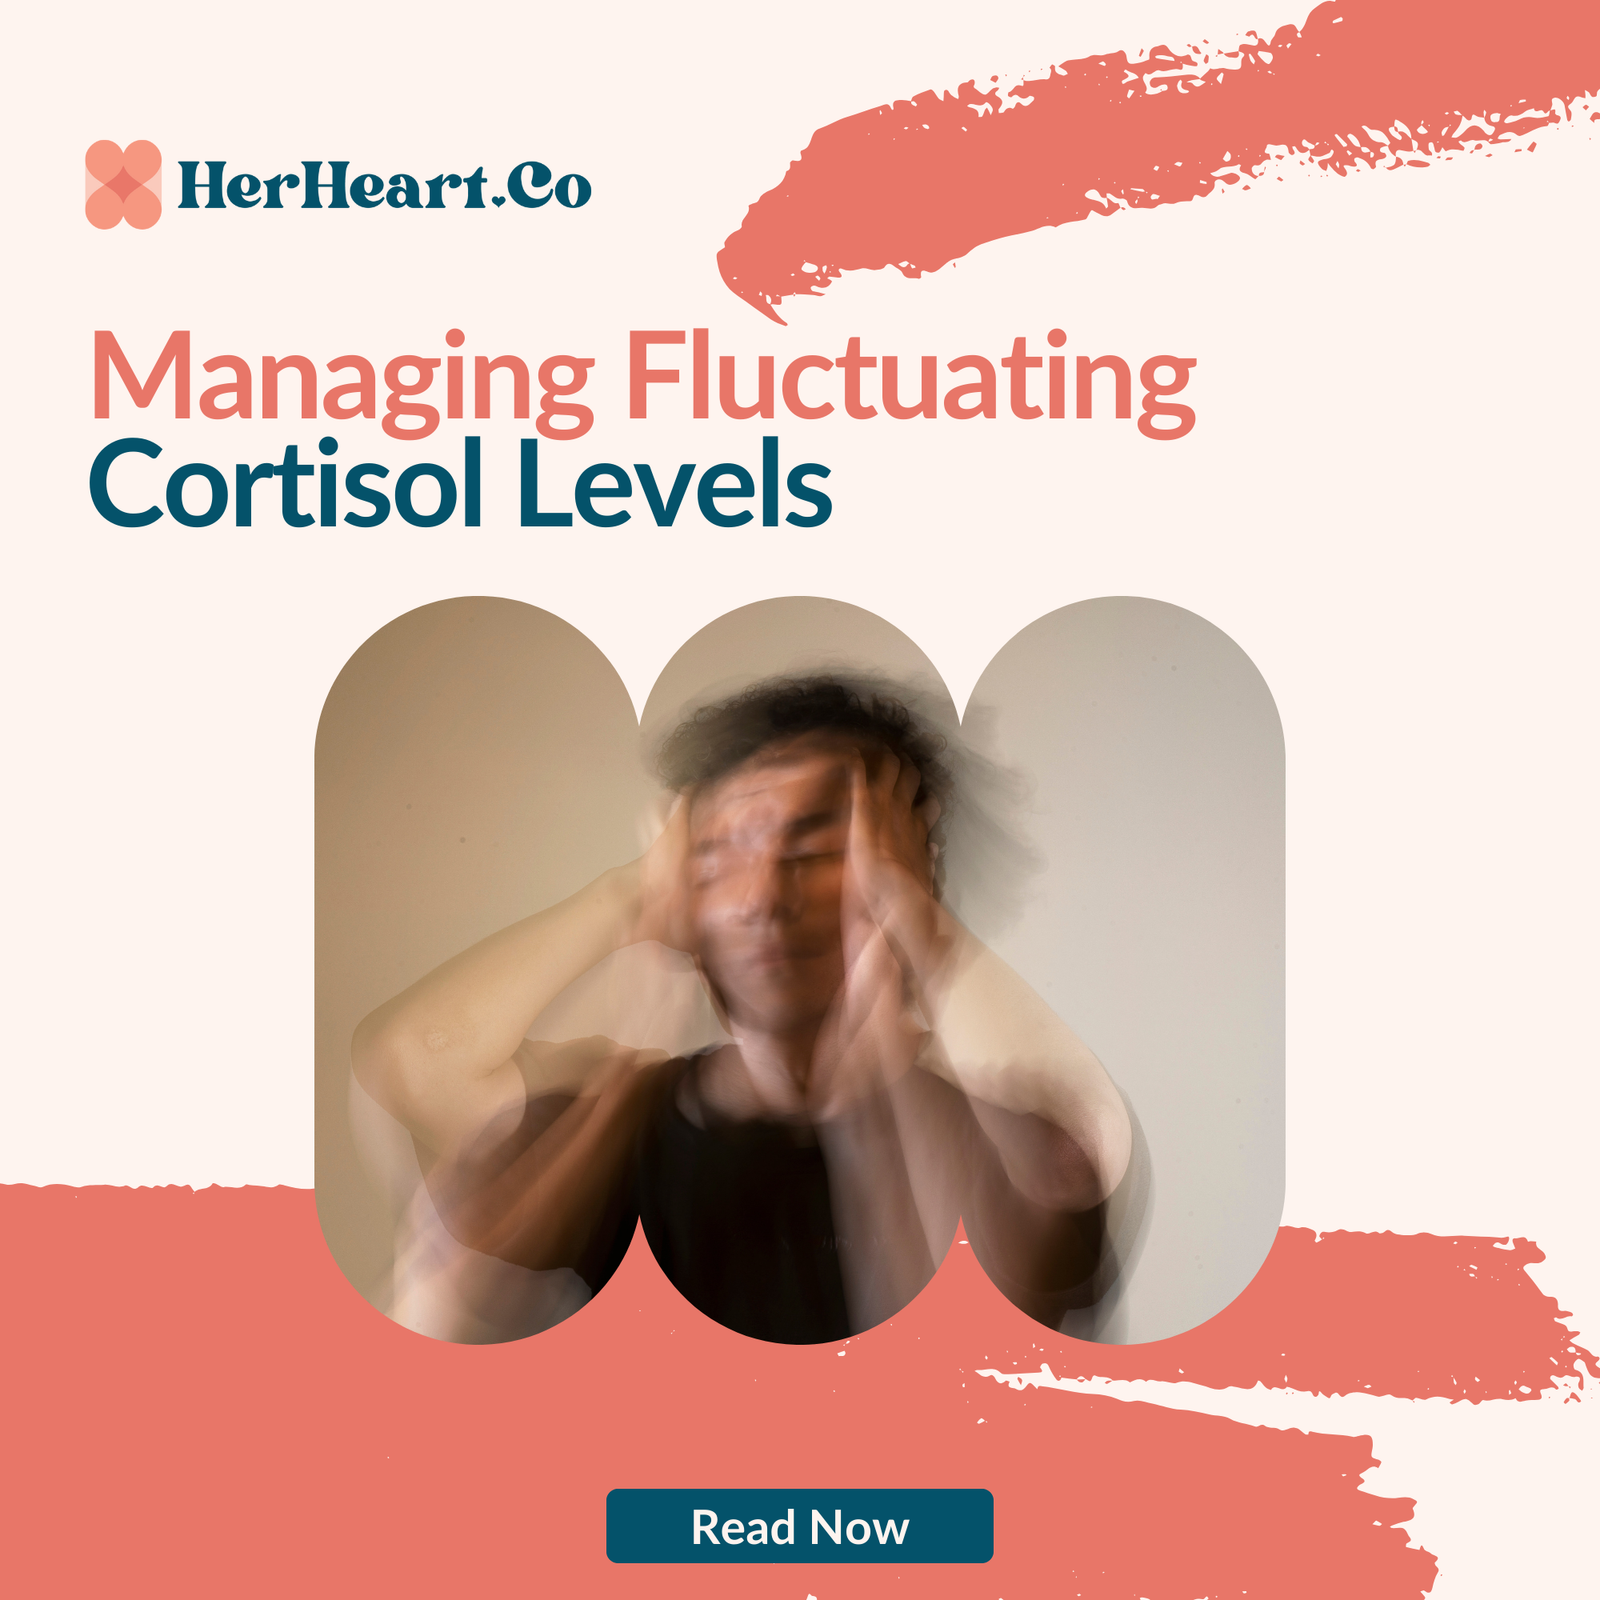 How to manage fluctuating cortisol levels